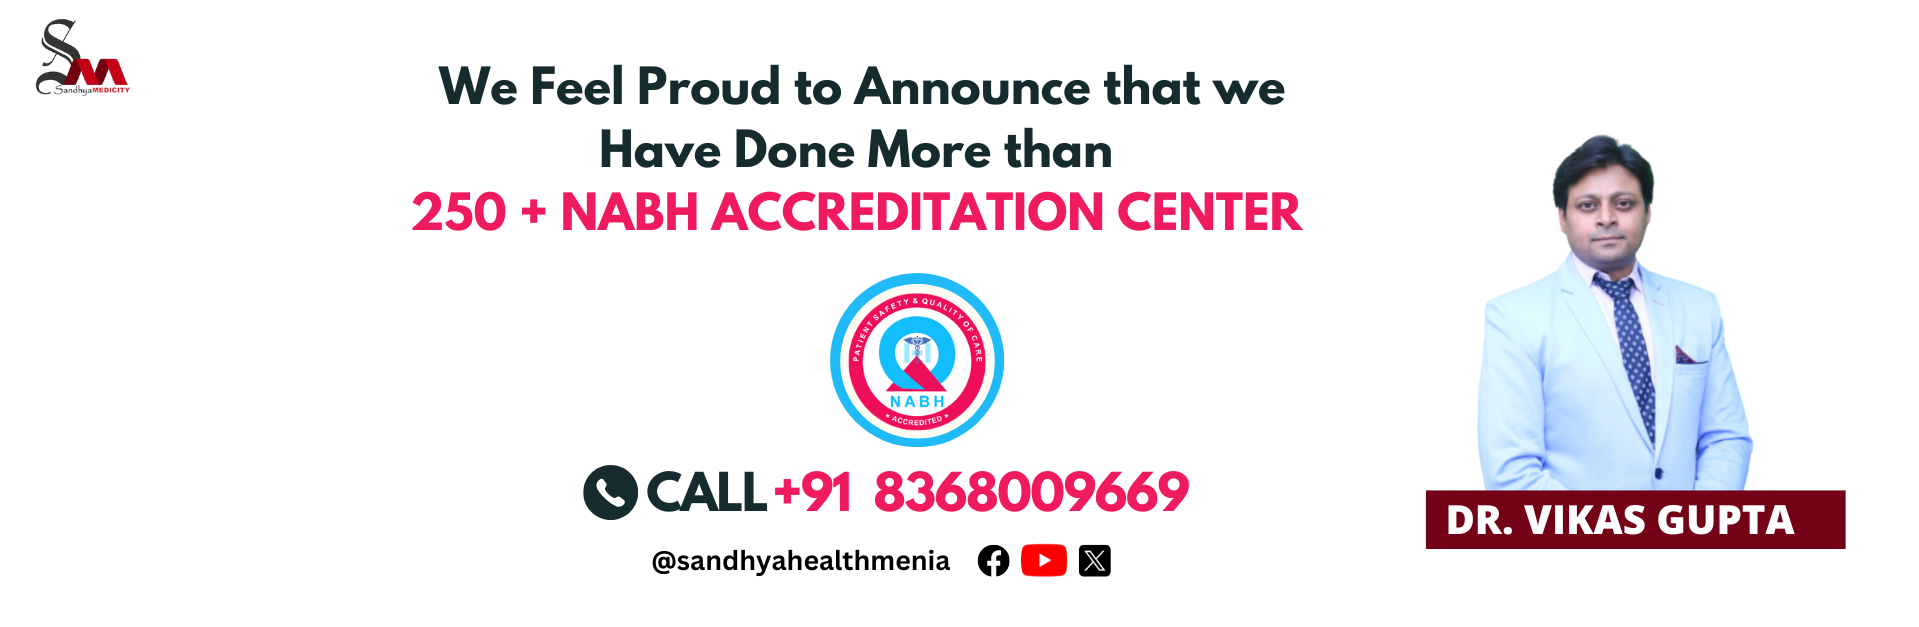 We feel proud to announce that we have done more than 250+ NABH ACCREDITATION CENTER DR. VIKAS GUPTA +91 8368009669 Call